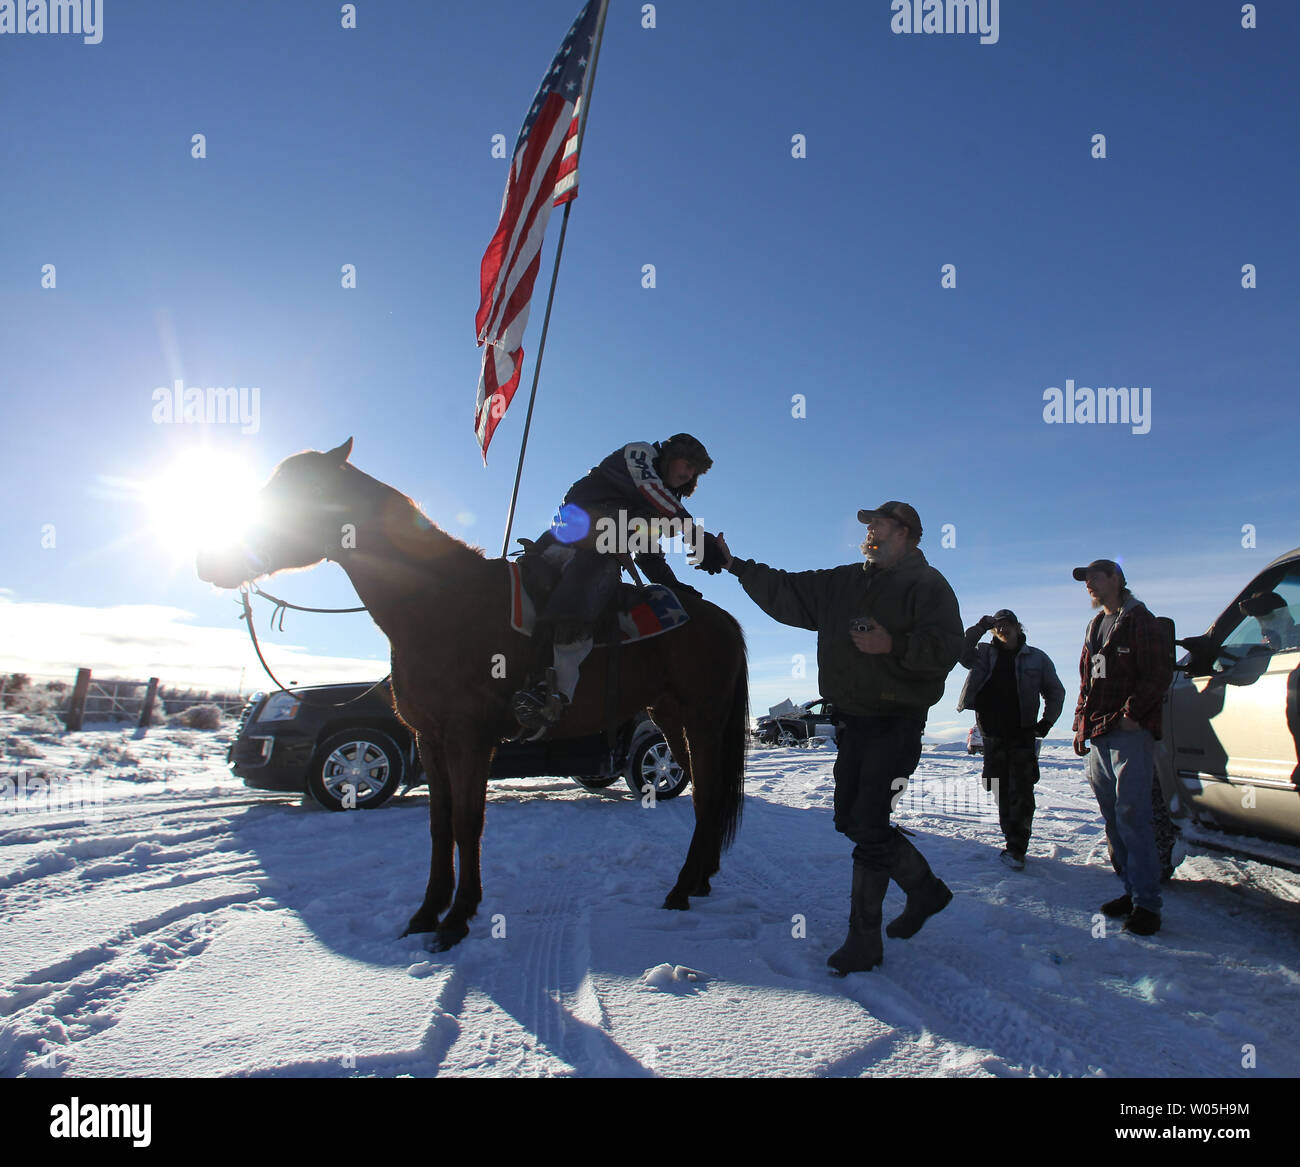 Duane Ehmer, of Irrigon, Oregon, left, greets Brad Williams, who joined the armed activists at the Malheur National Wildlife Reserve on January 15, 2016 in Burns, Oregon. Ehmer has been pulling sentry duty during the takeover. Ammon Bundy and about 20 other protesters took over the refuge on Jan. 2 after a rally to support the imprisoned local ranchers Dwight Hammond Jr., and his son, Steven Hammond.      Photo by Jim Bryant/UPI Stock Photo